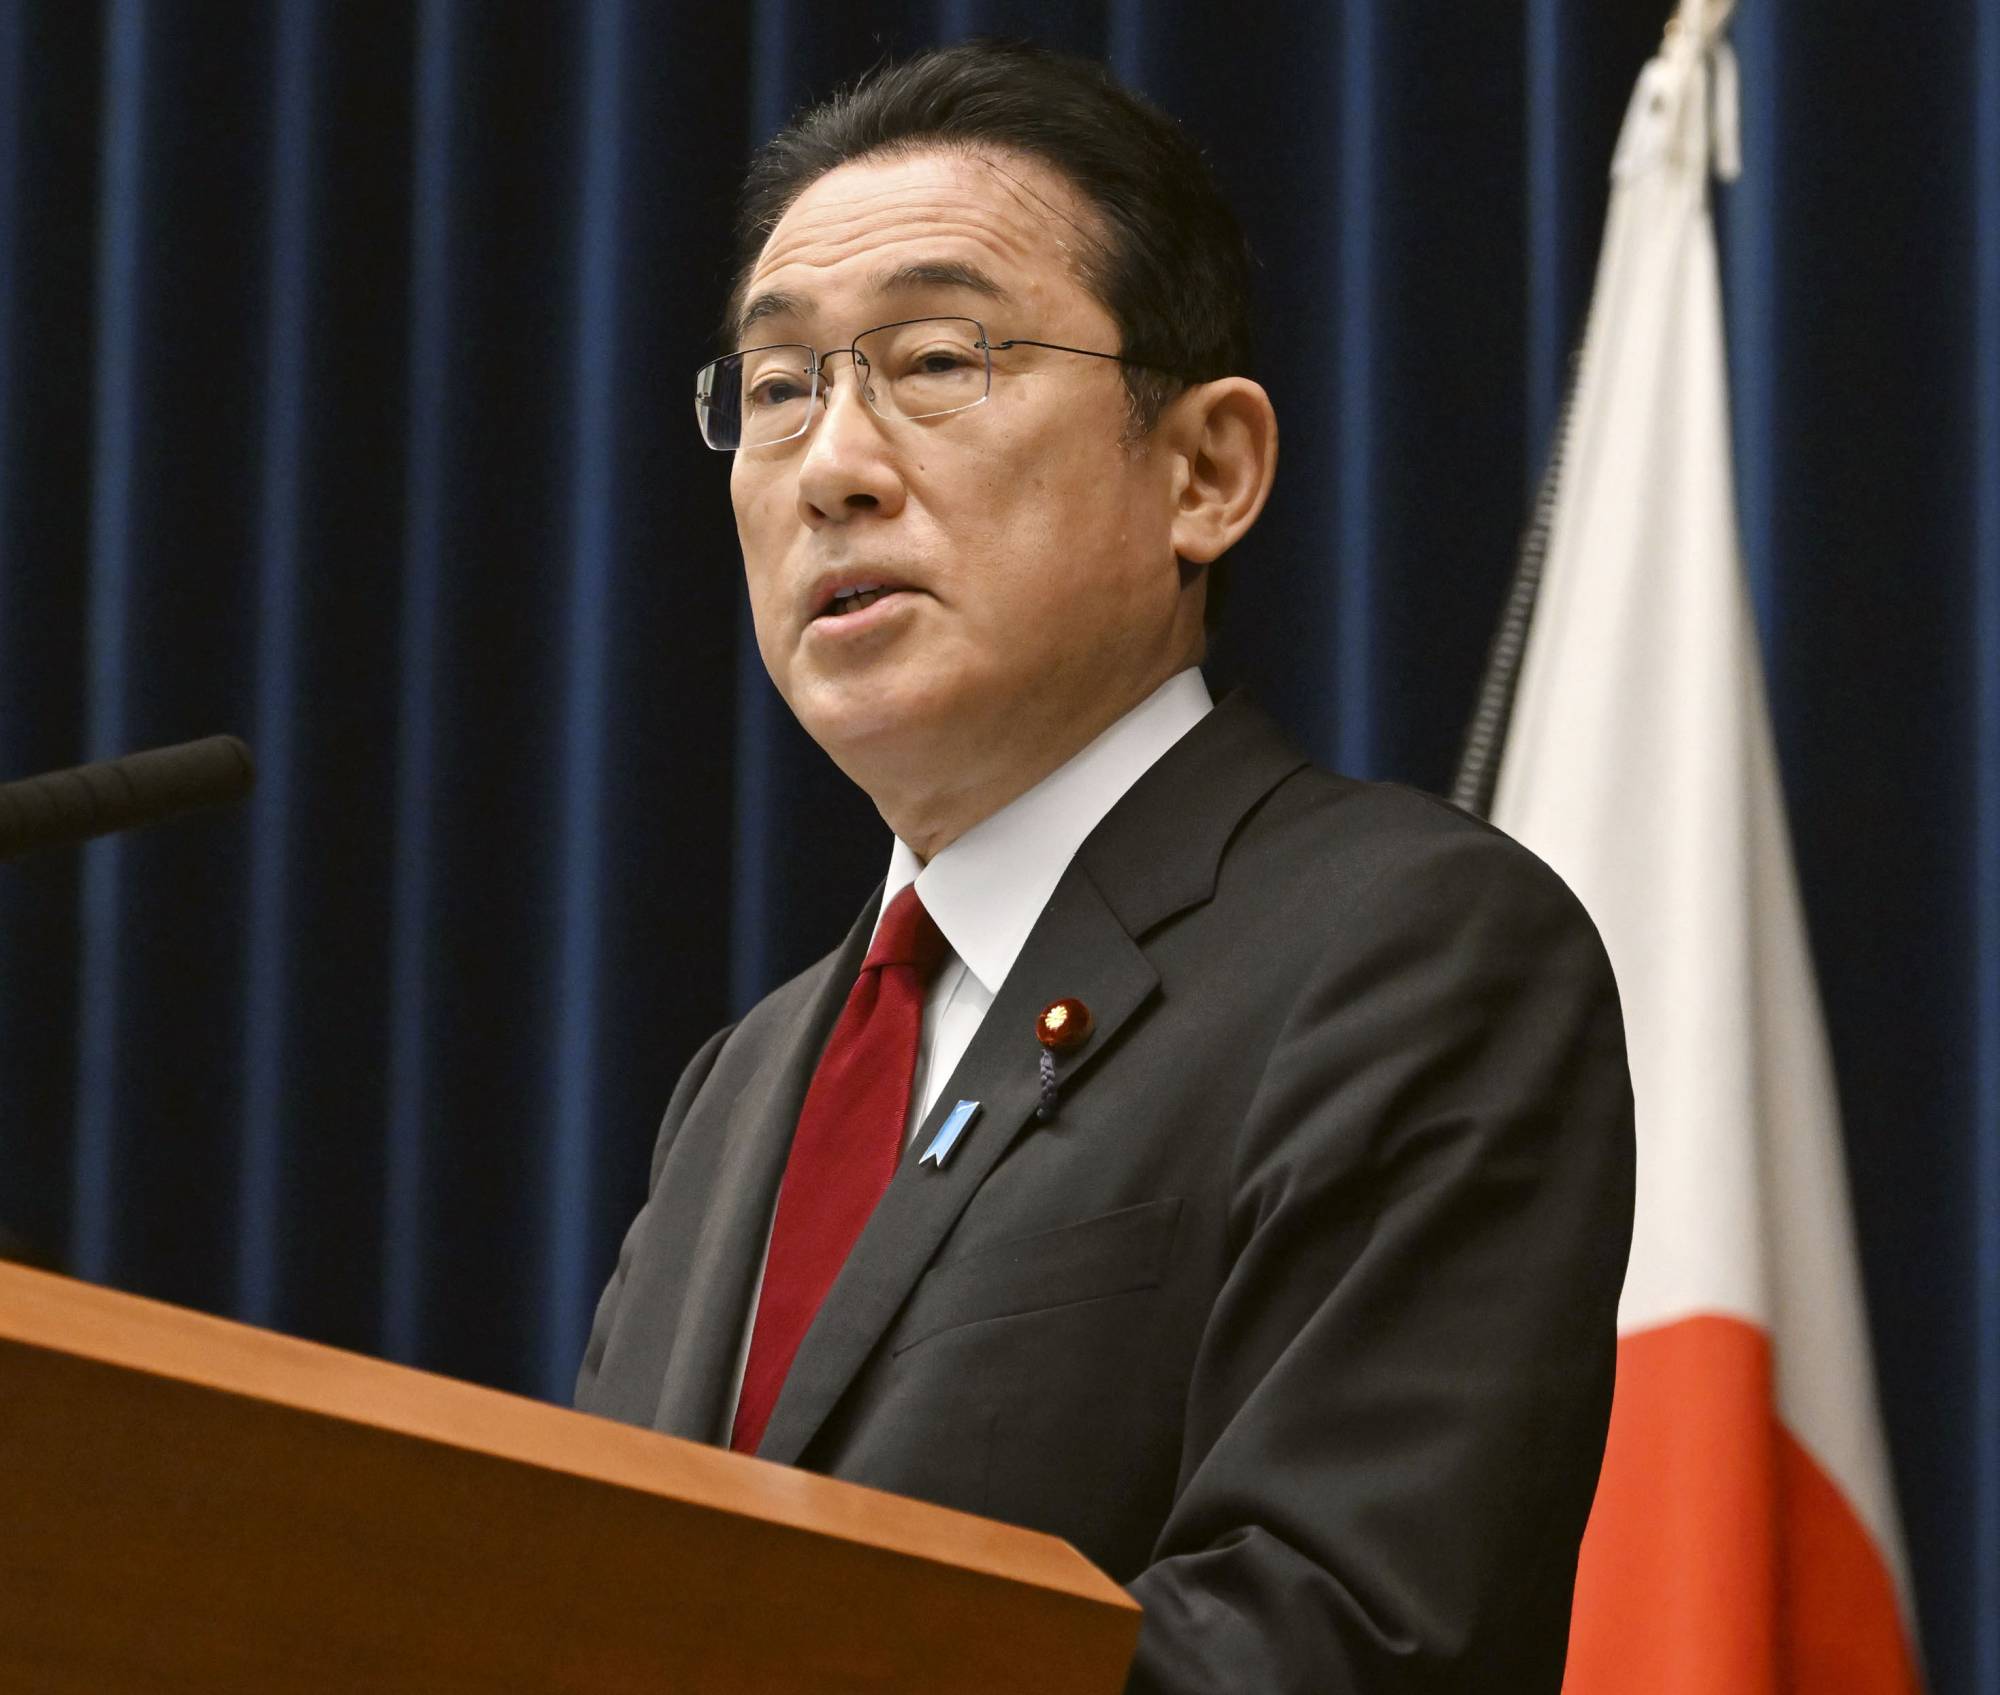 Prime Minister Fumio Kishida attends a news conference announcing sanctions on Russia over its invasion of Ukraine at his office in Tokyo on Friday. | KYODO